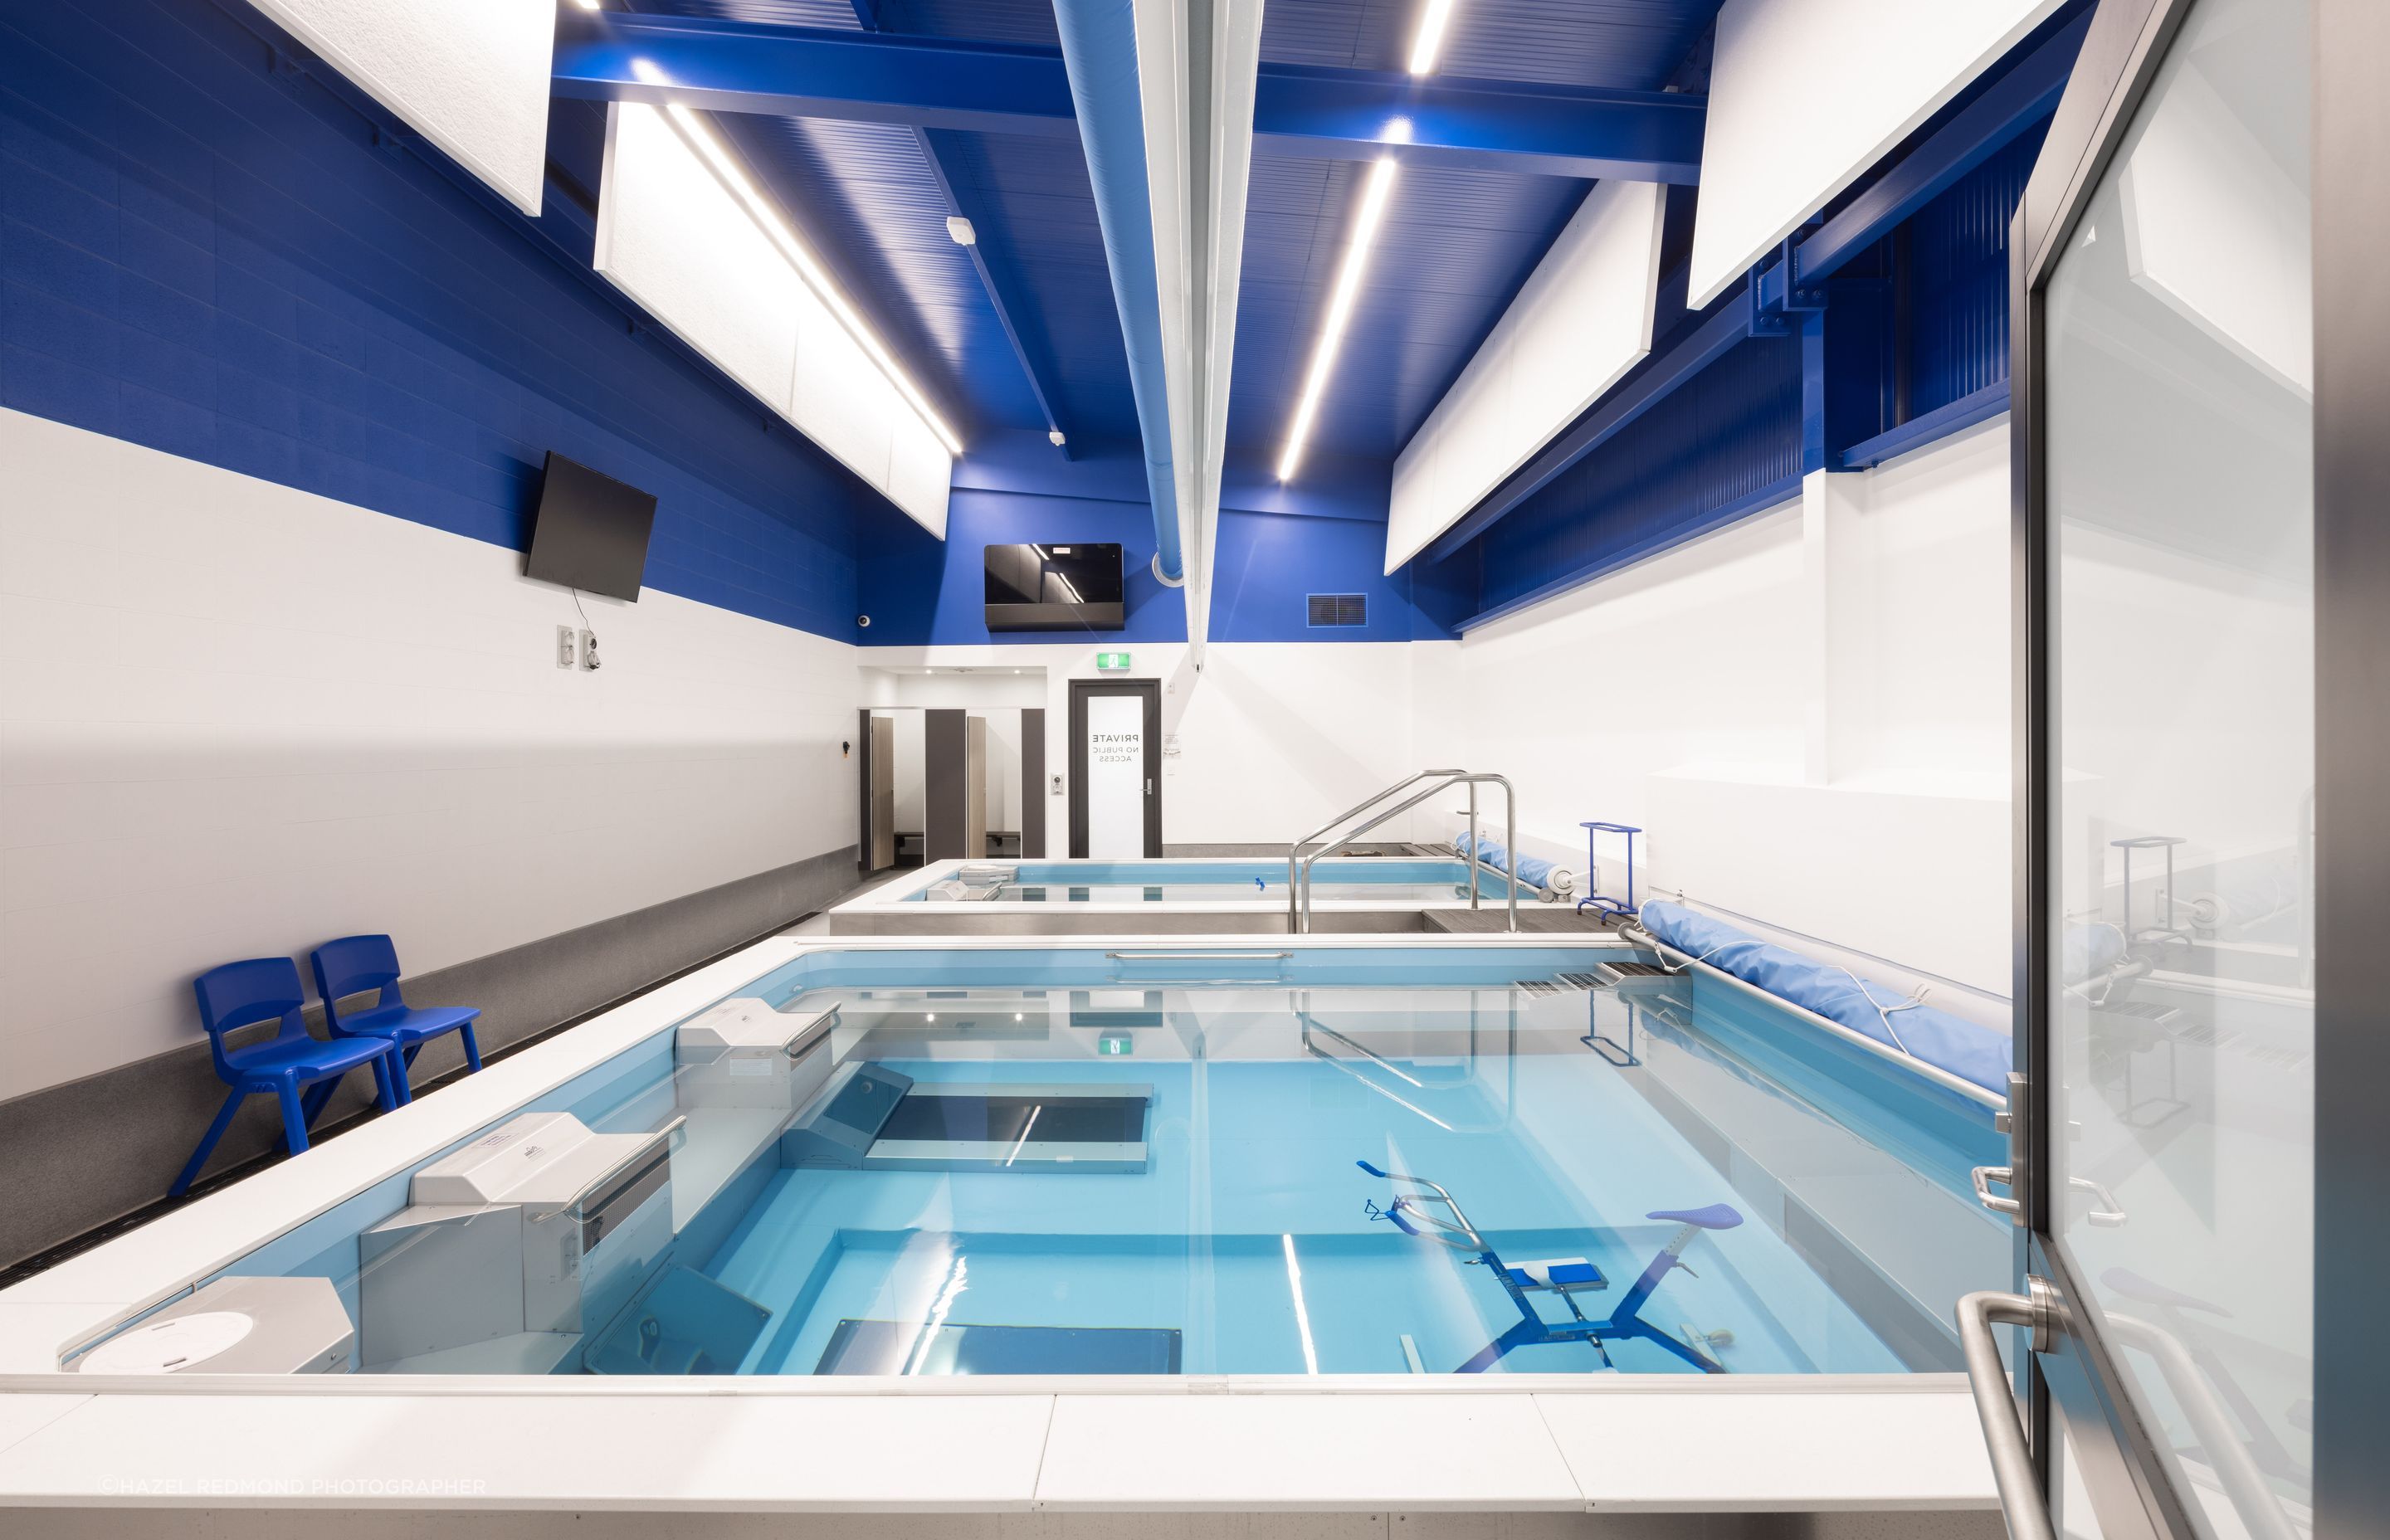 Two hydrotherapy pools can be found inside.